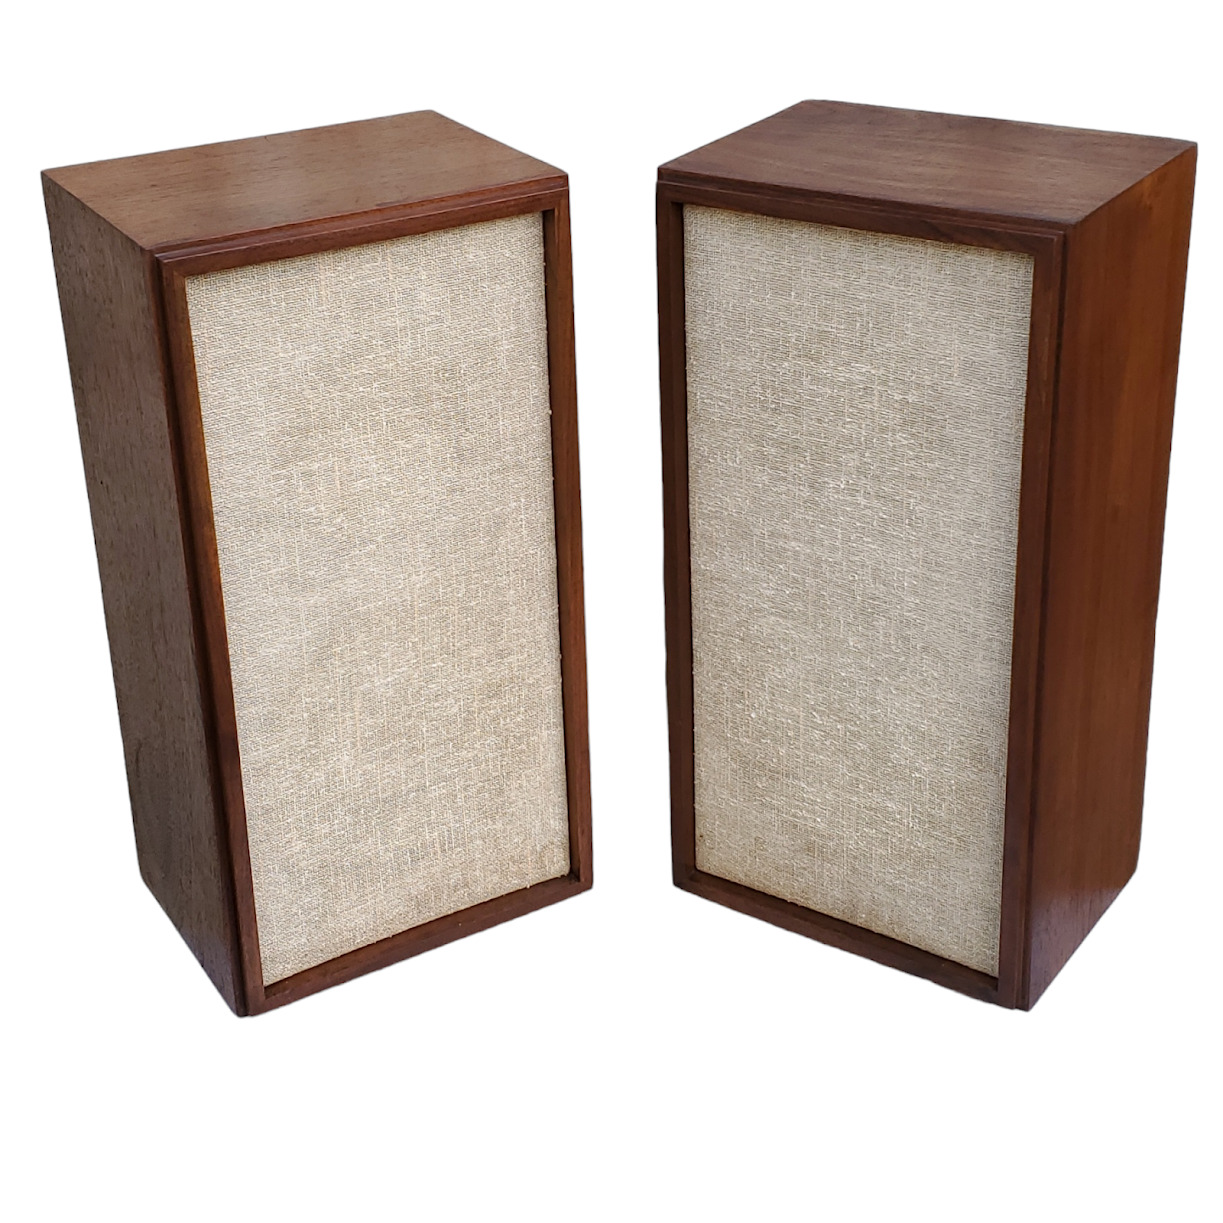 Mid Century Modern KLH Model 20 Speakers Refinished Walnut Cabinets Tested Pair